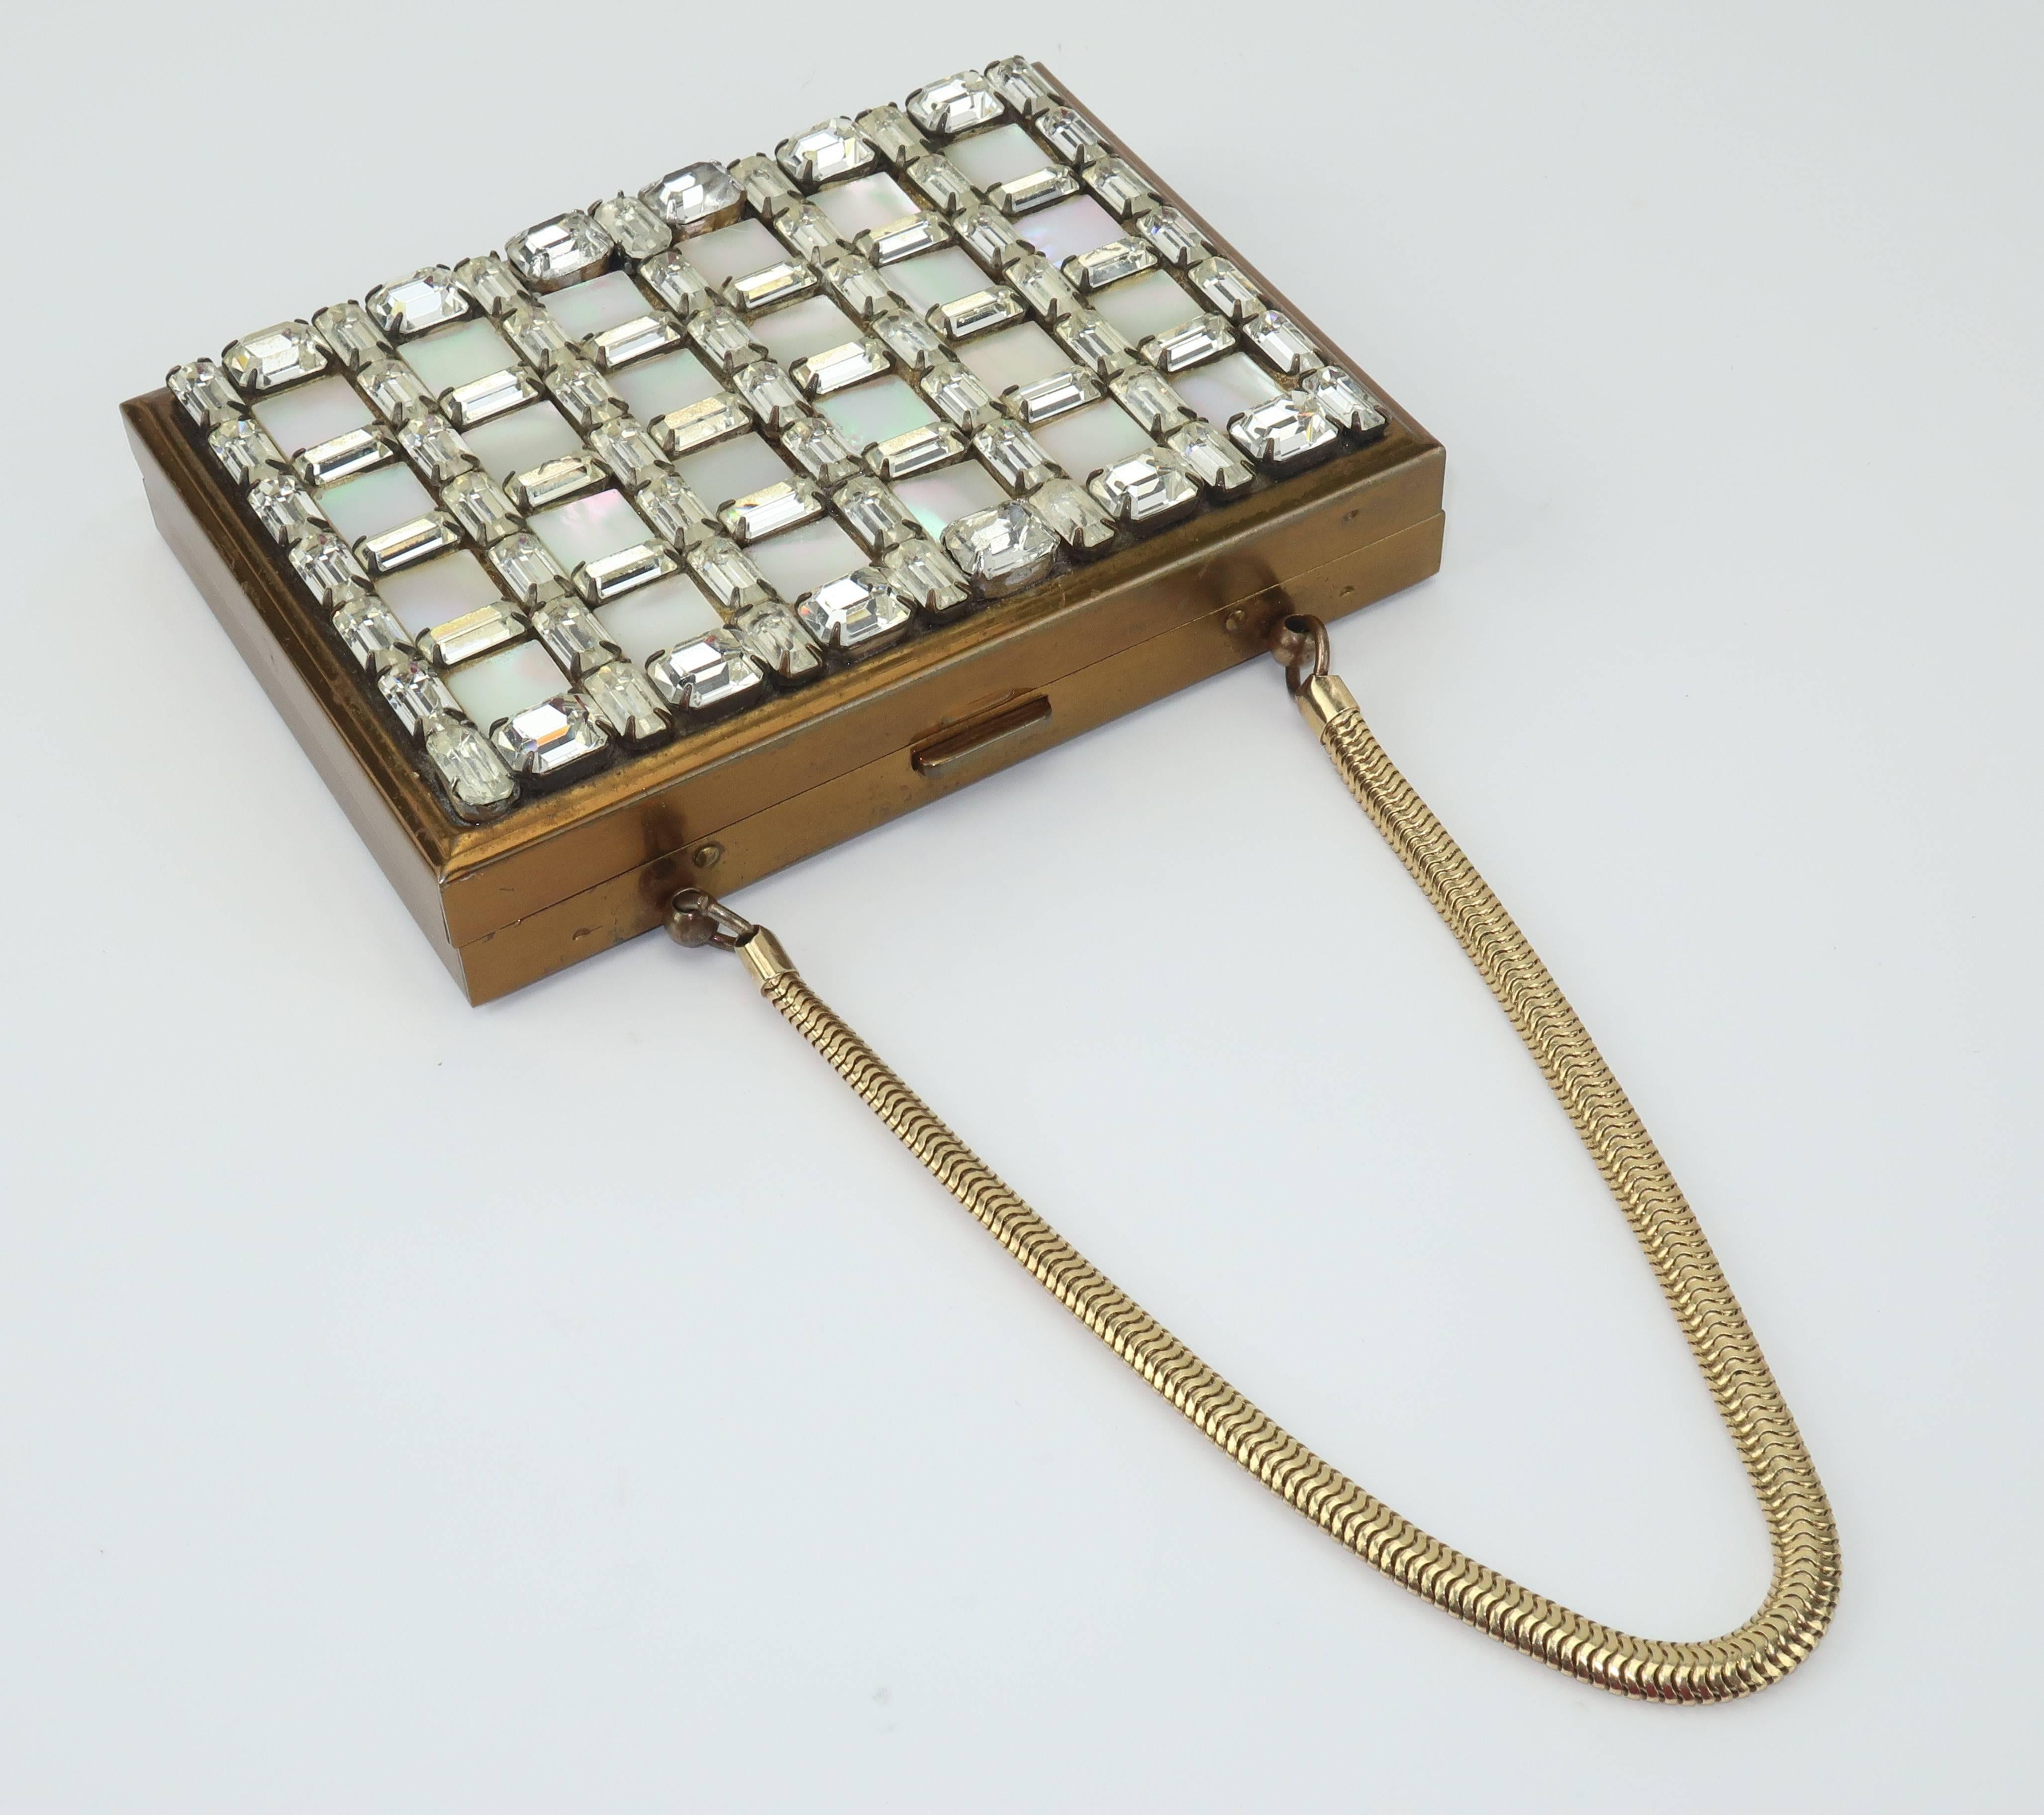 Beige 1950’s Wiesner of Miami Rhinestone and Mother-of-Pearl Compact Handbag